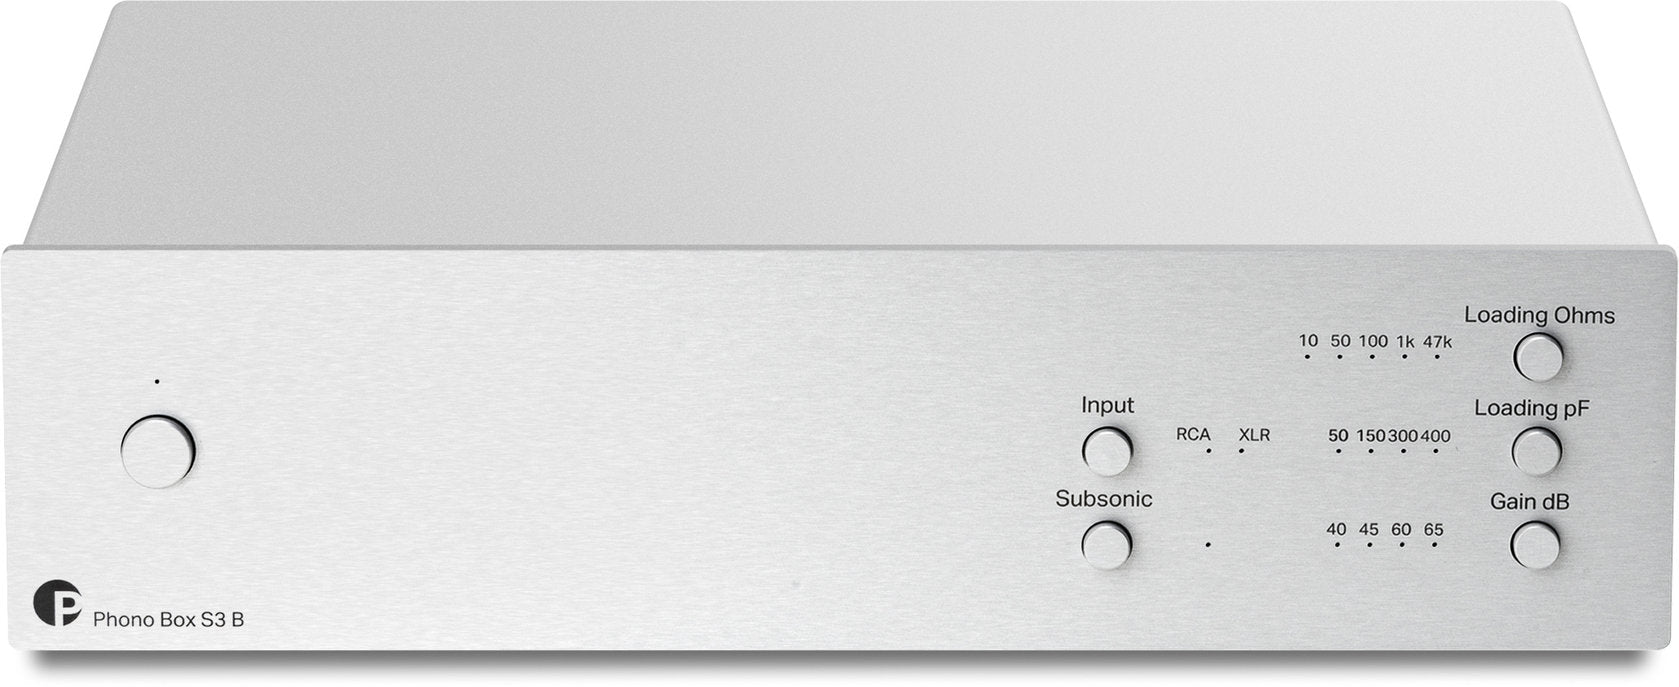 Pro-Ject Phono Box S3 B turntable preamplifier